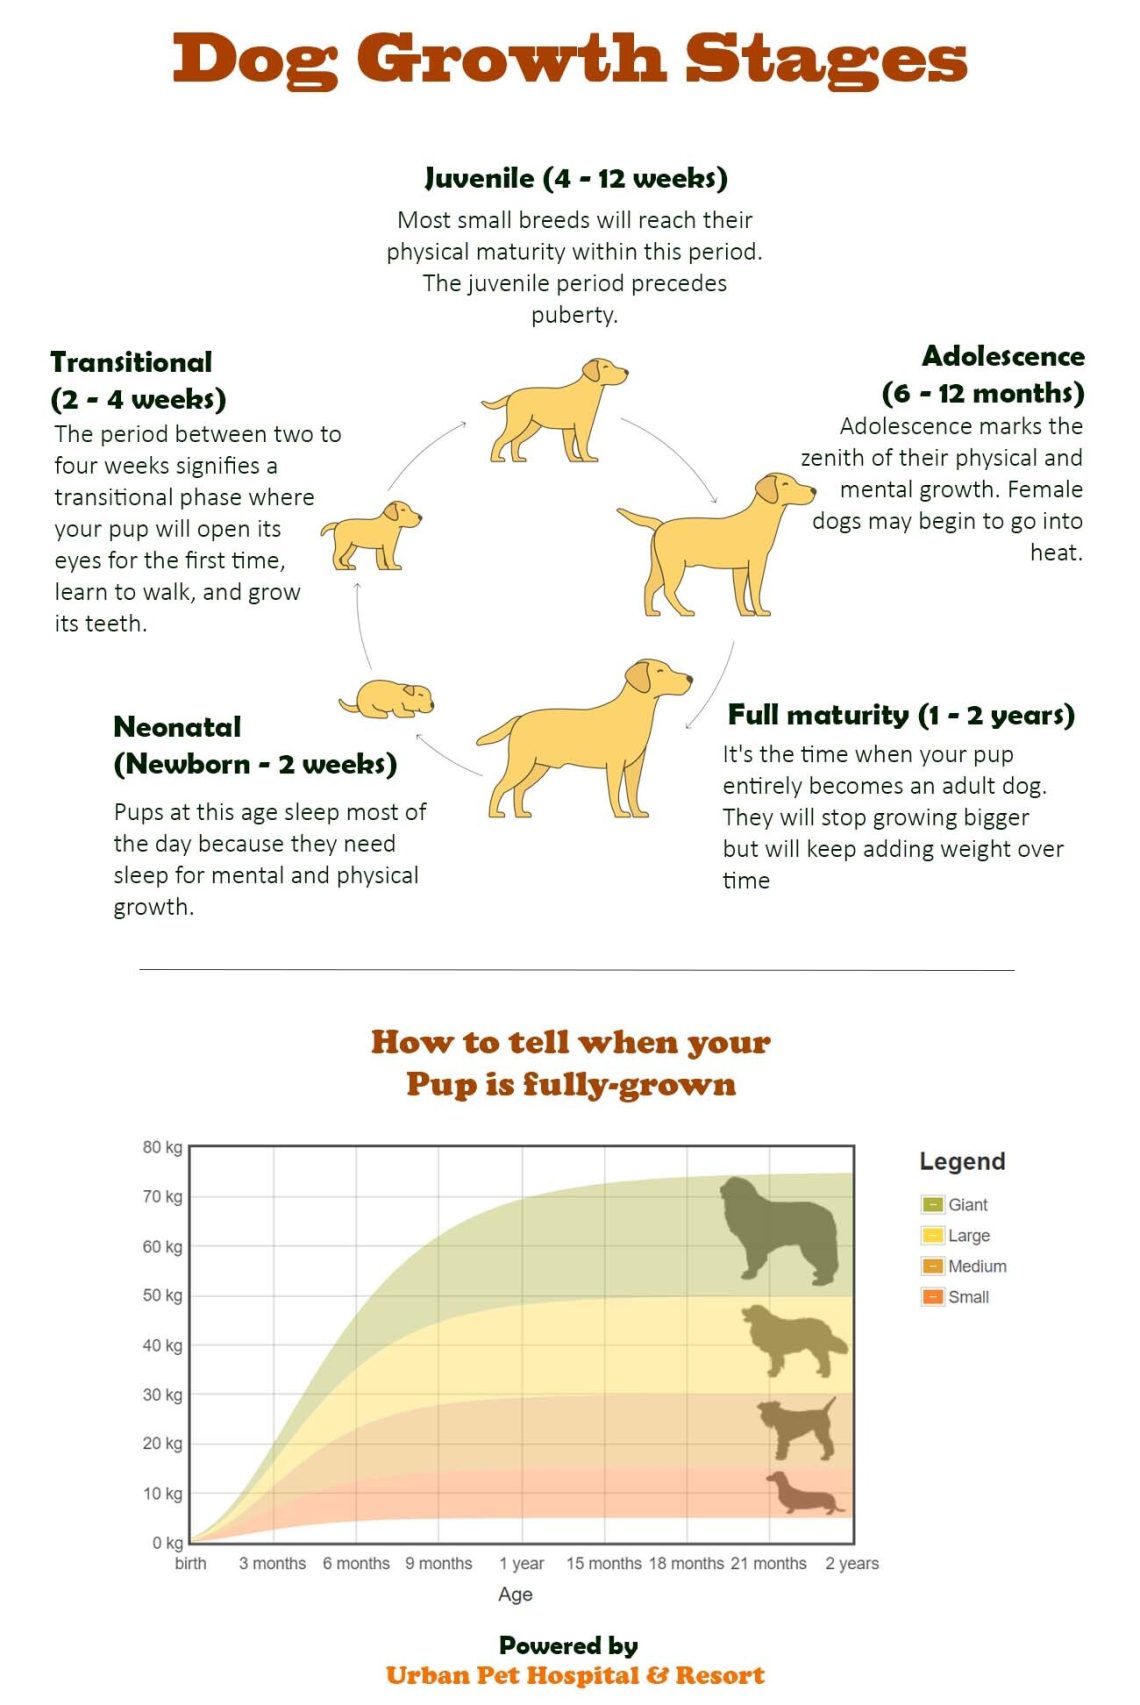 At what age do dogs stop growing?